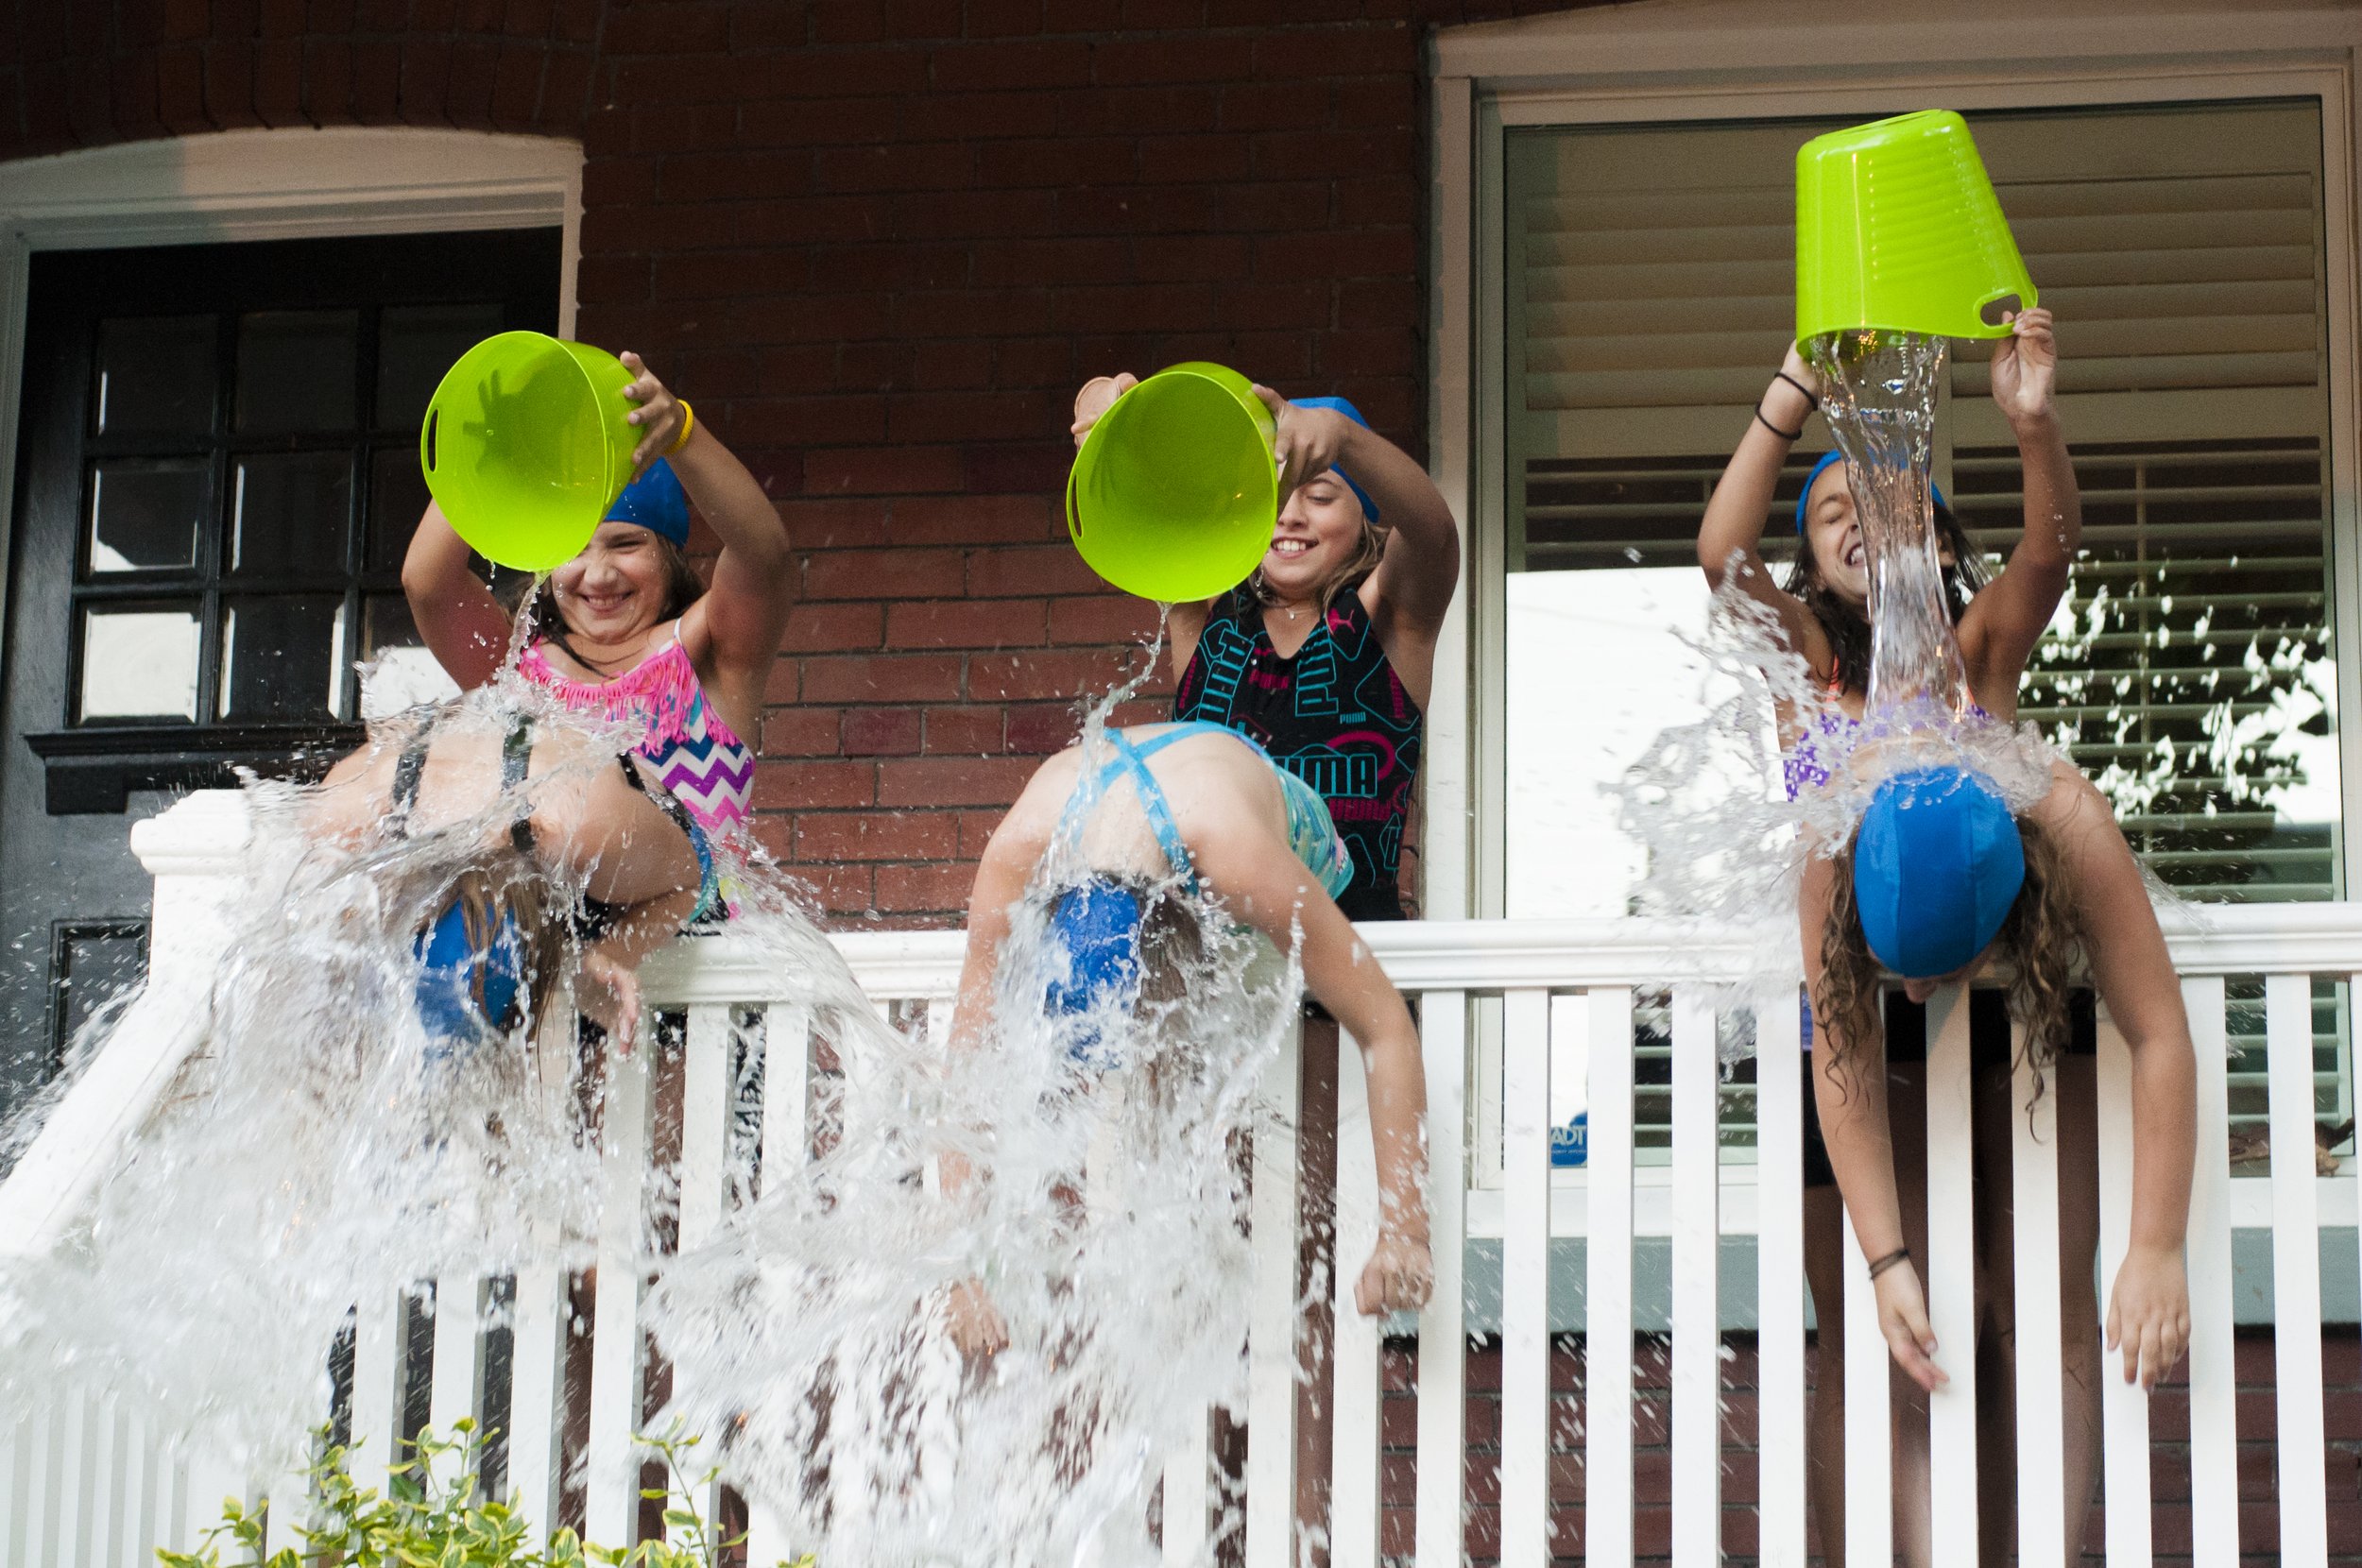 Three girls hang over a porch fence, while three other girls pour a bucket of water over their head